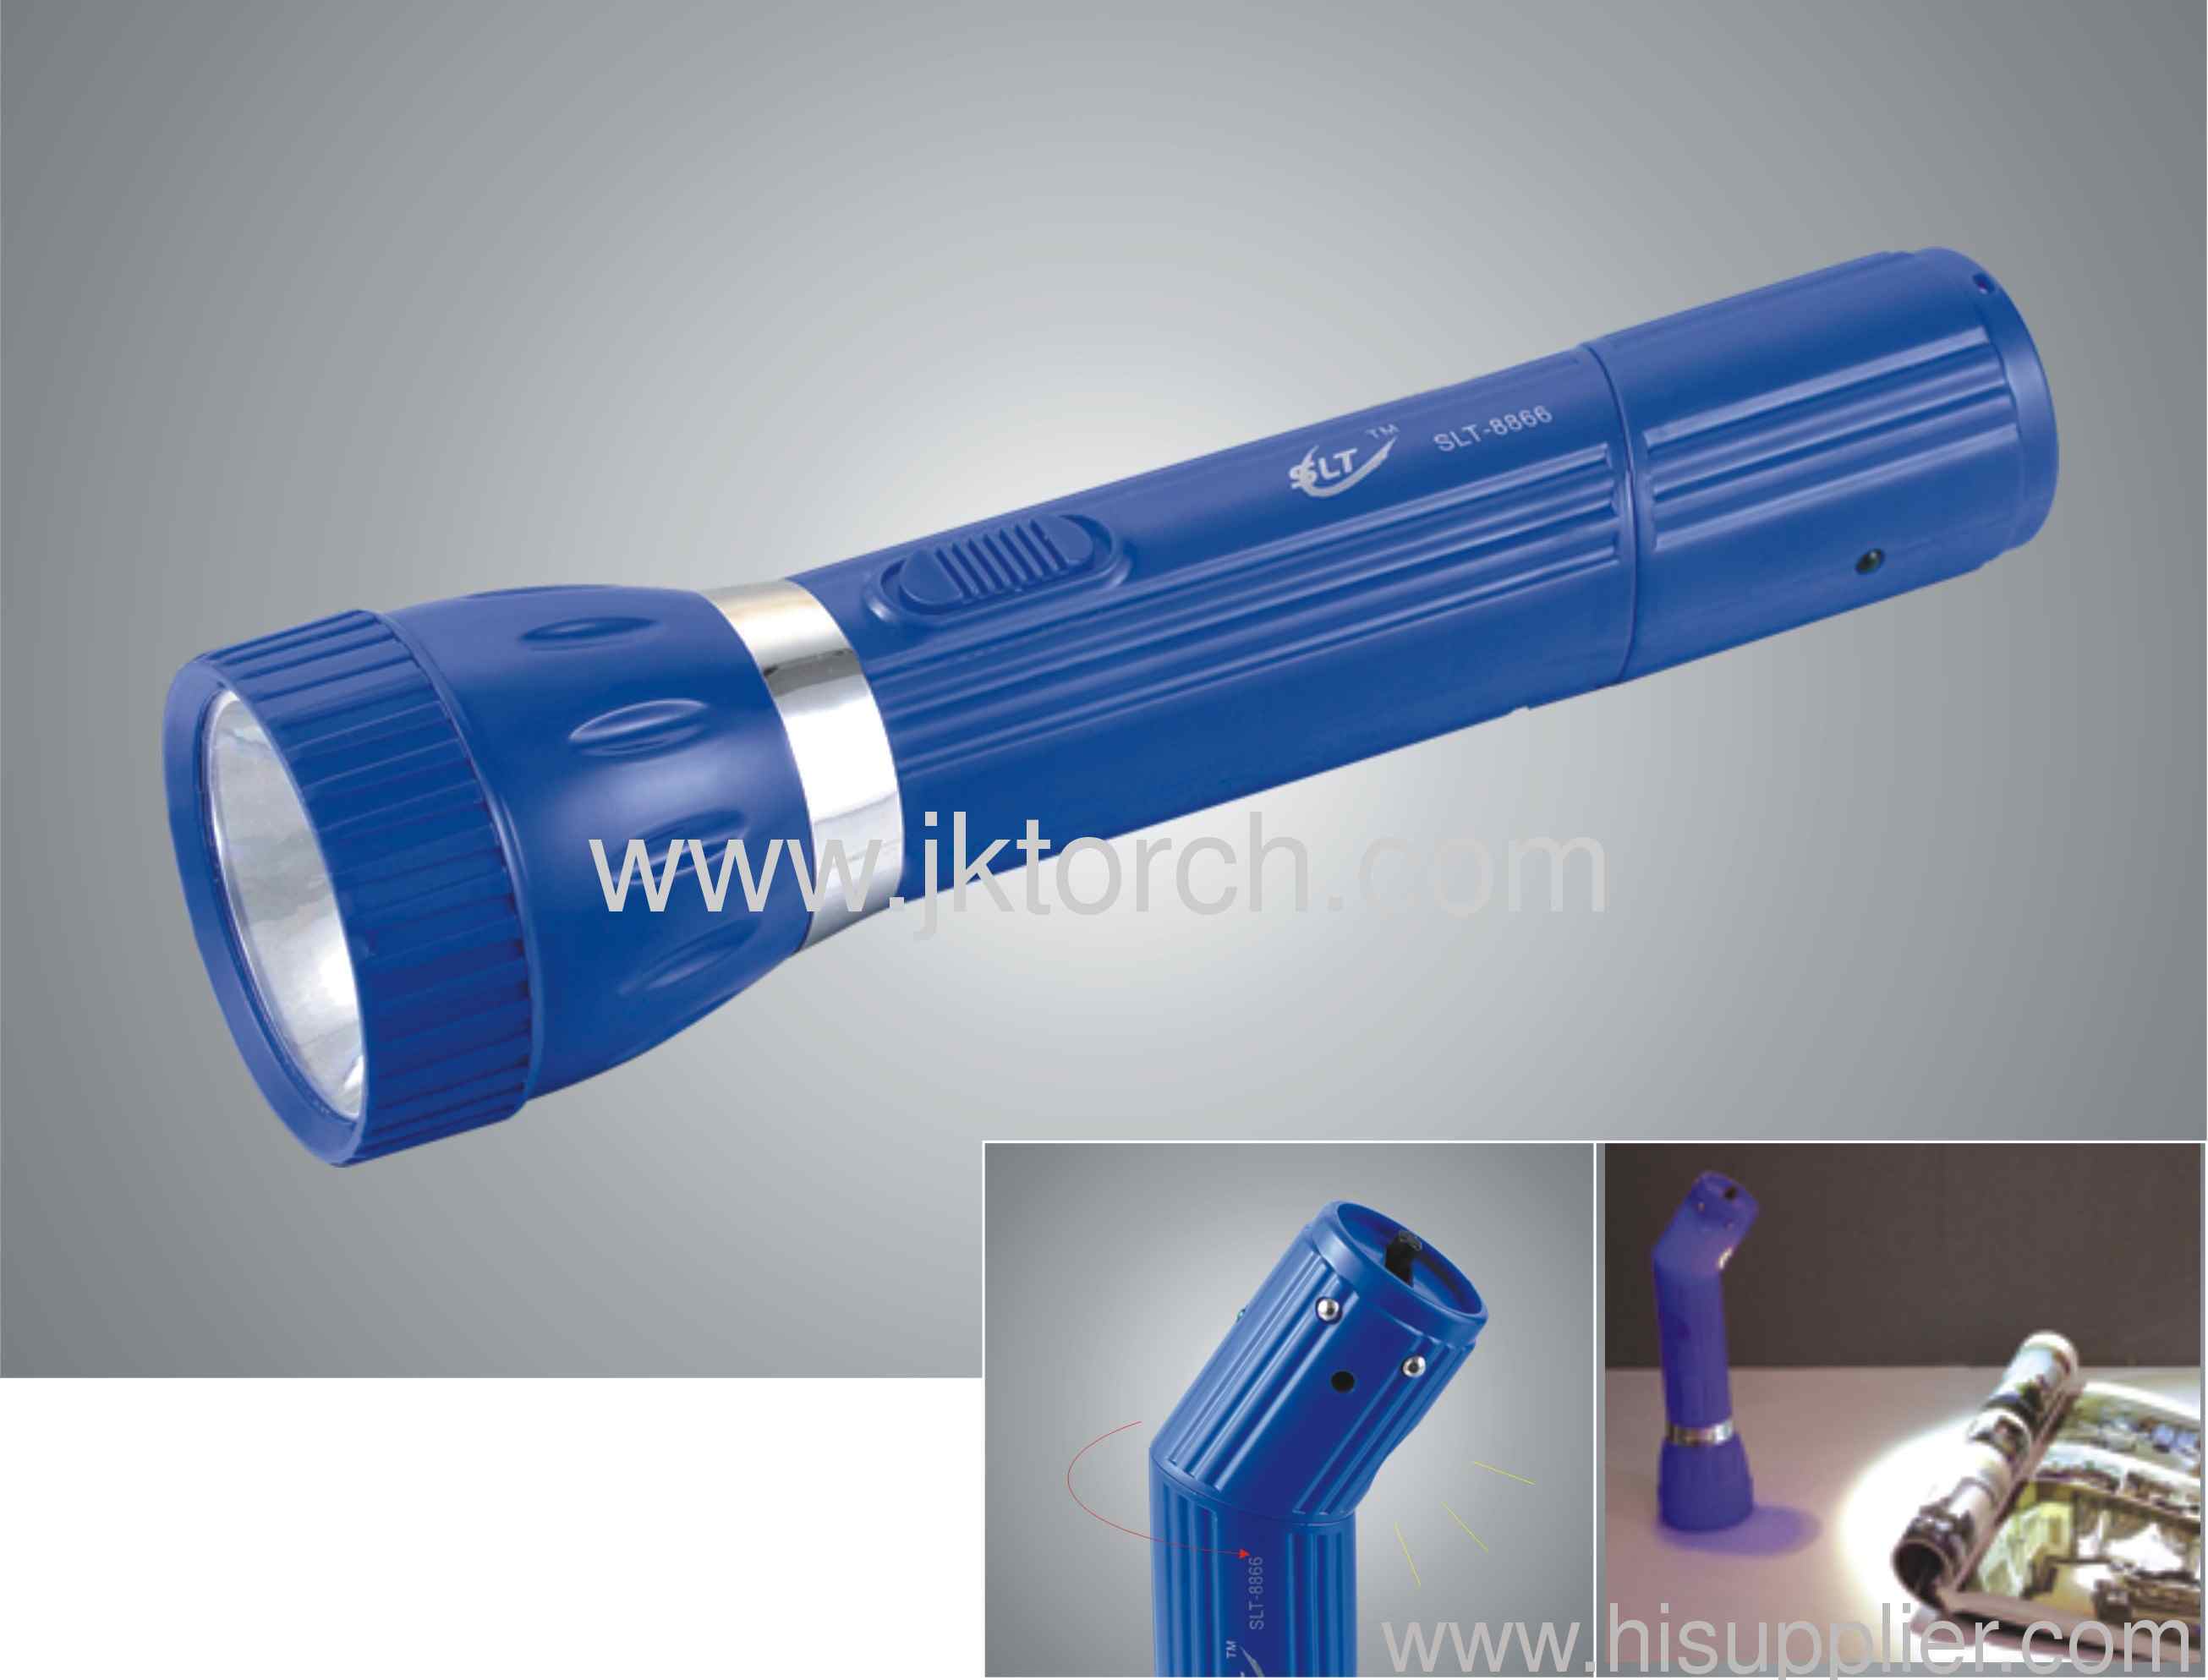 High power led rechargeable flashlight with waterproof